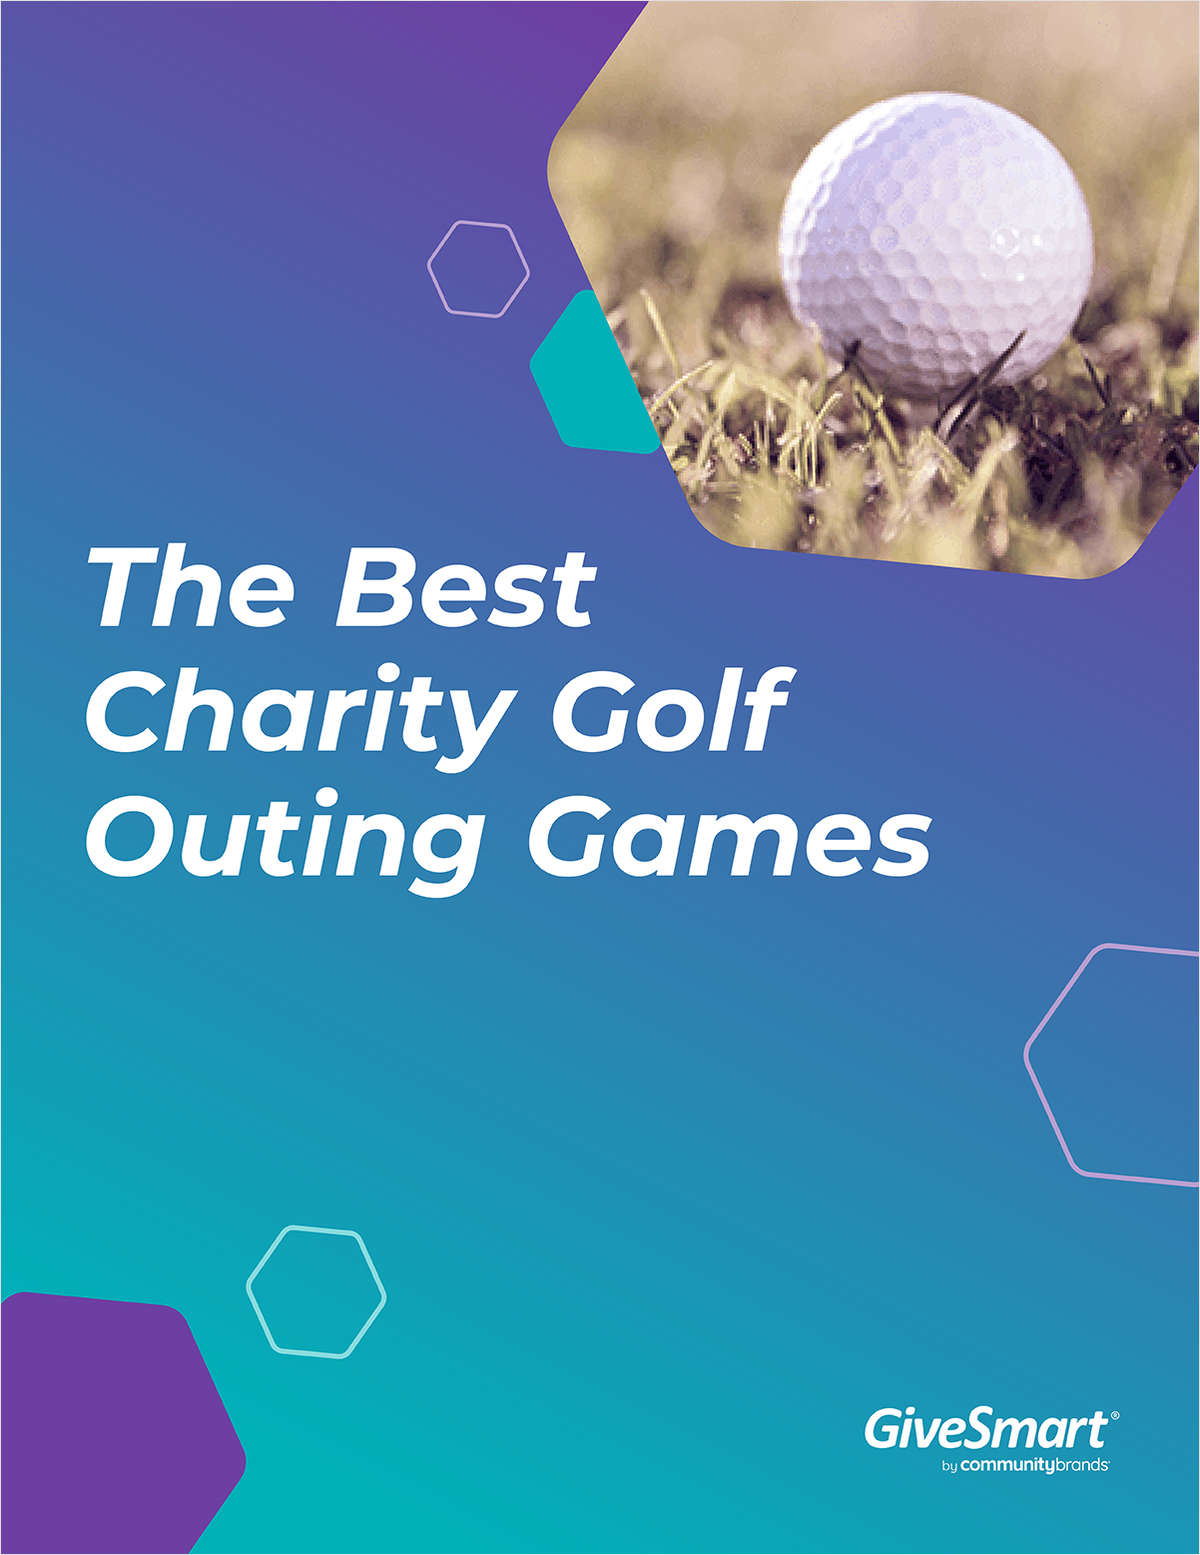 The Best Charity Golf Outing Games